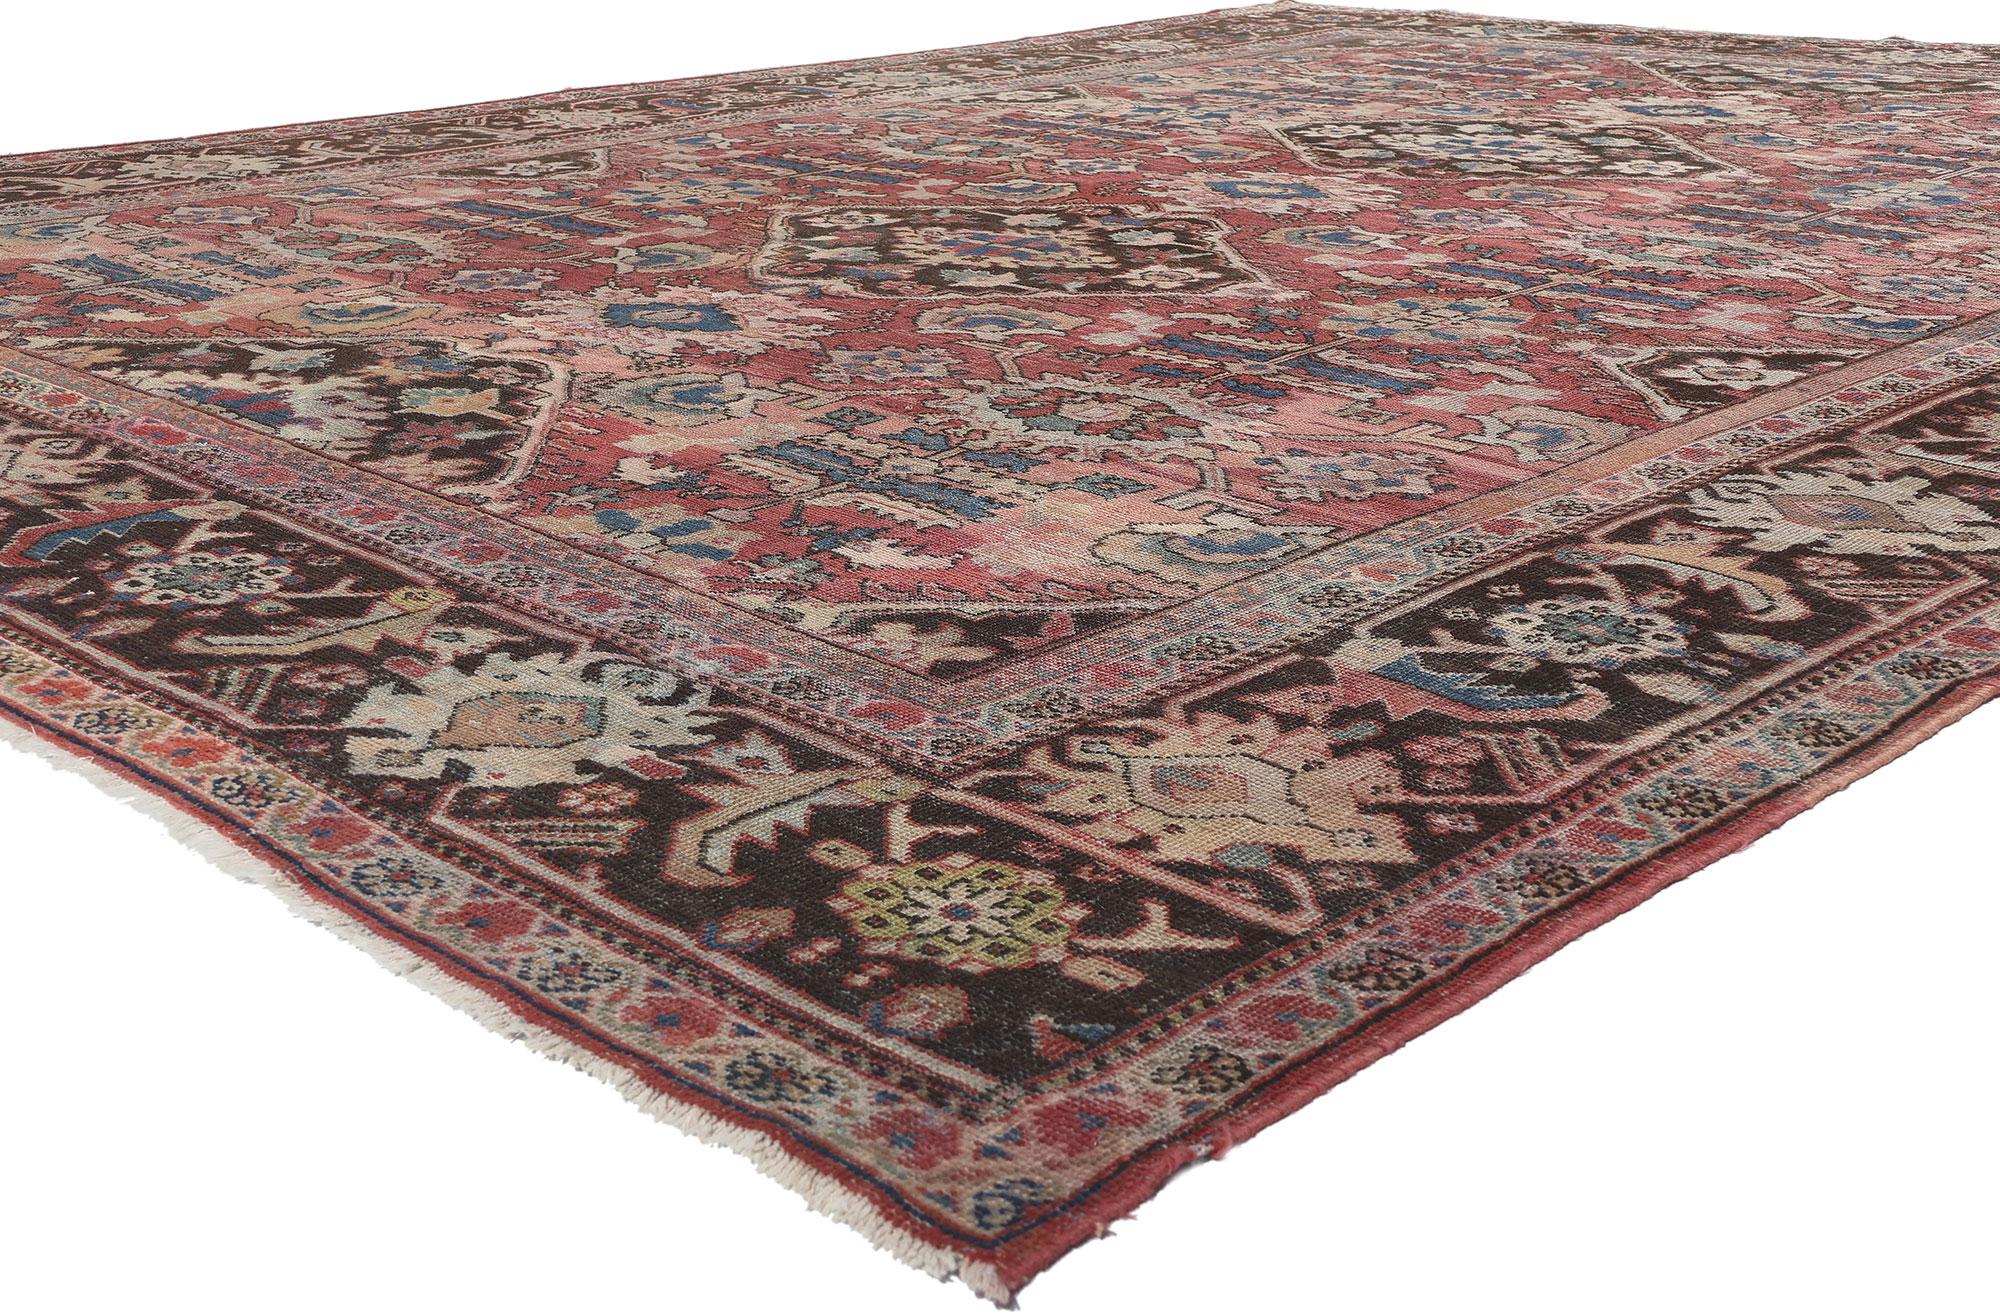 78710 Distressed Antique-Worn Persian Mahal Rug, 10'06 x 14'00. Antique-washed antique Persian Mahal rugs, originating from Iran's Mahallat region, undergo a special process. This process involves washing the rug with natural agents to soften colors